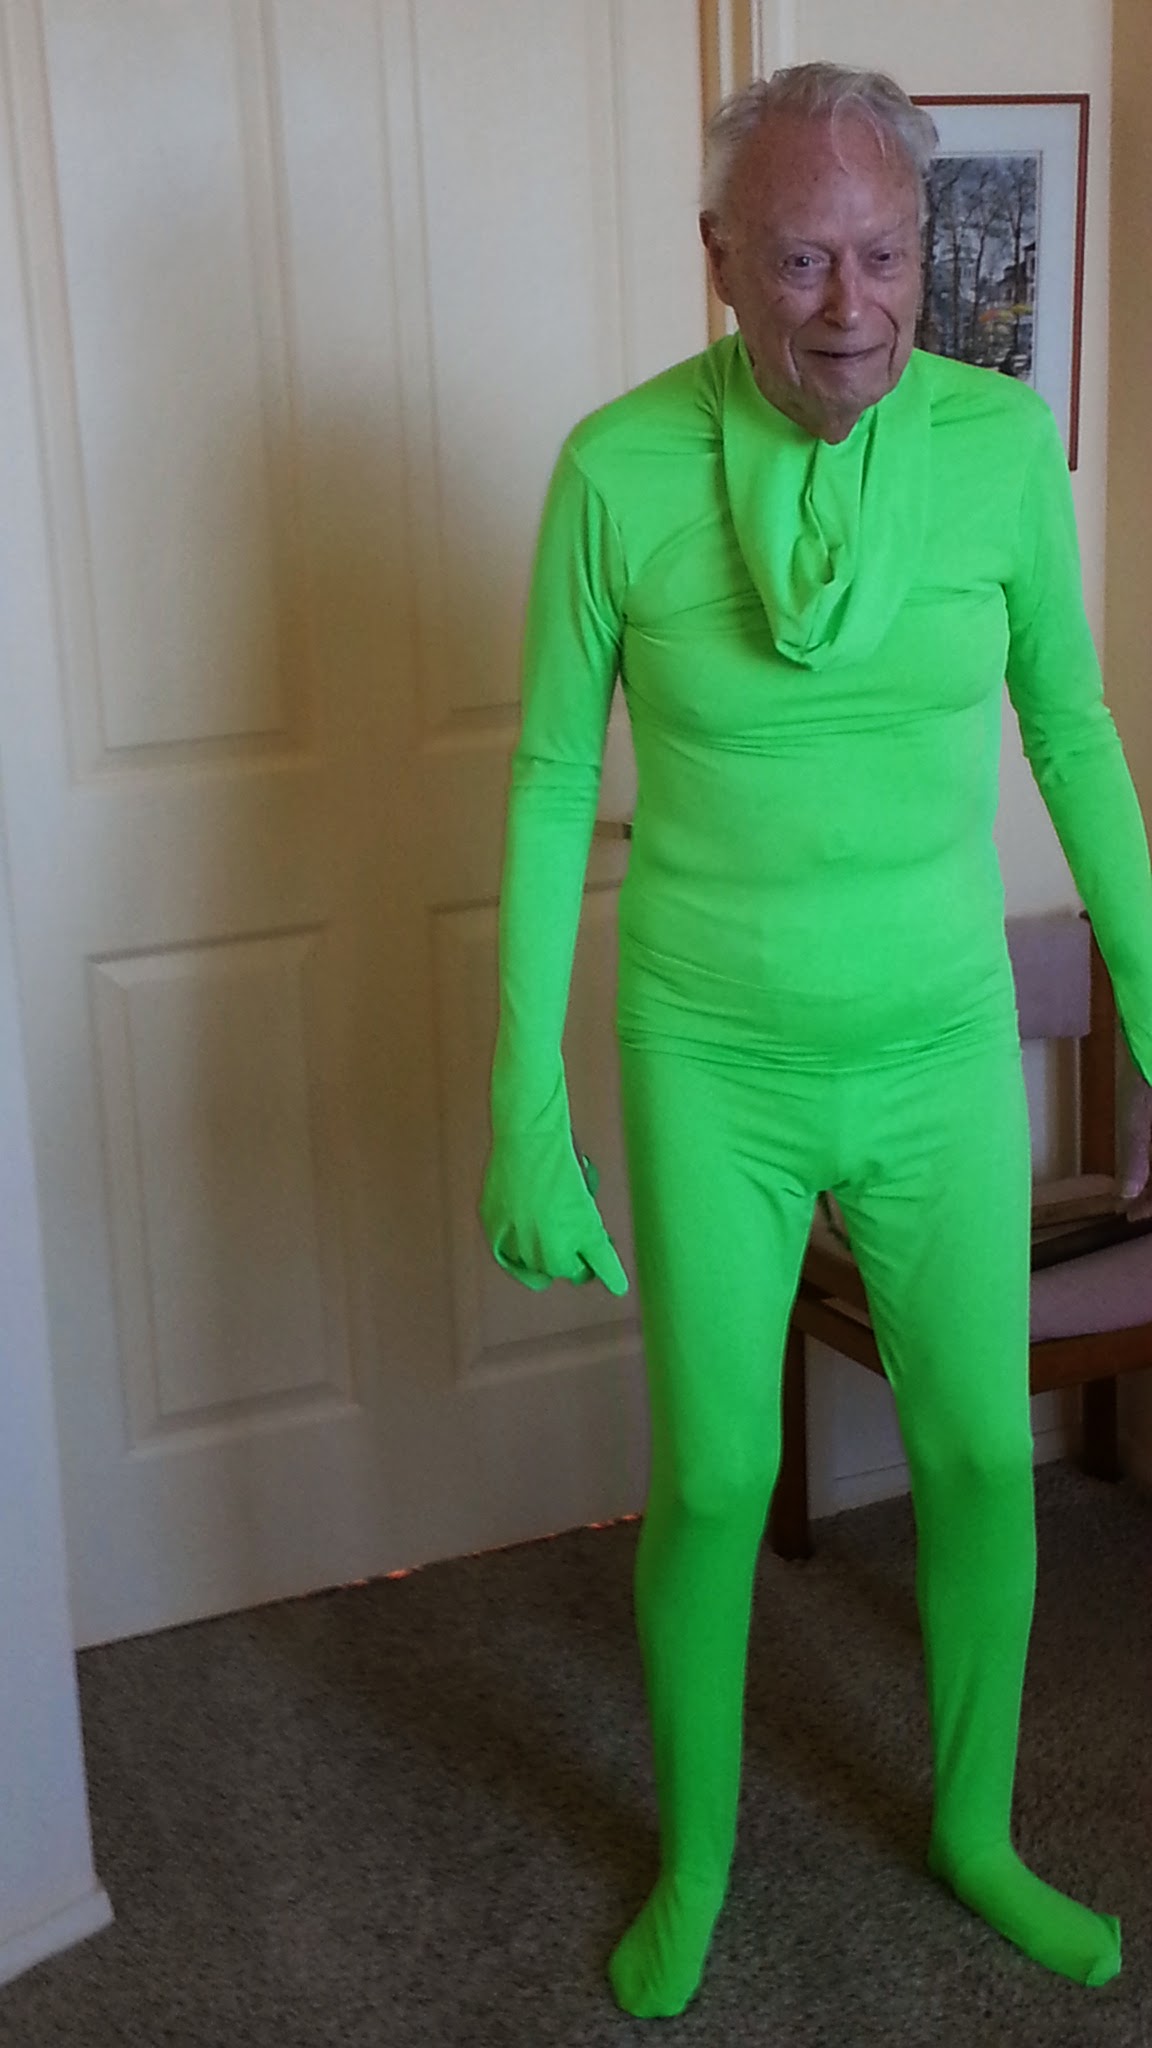 Dad bought a green suit so he could edit himself out of video sequences